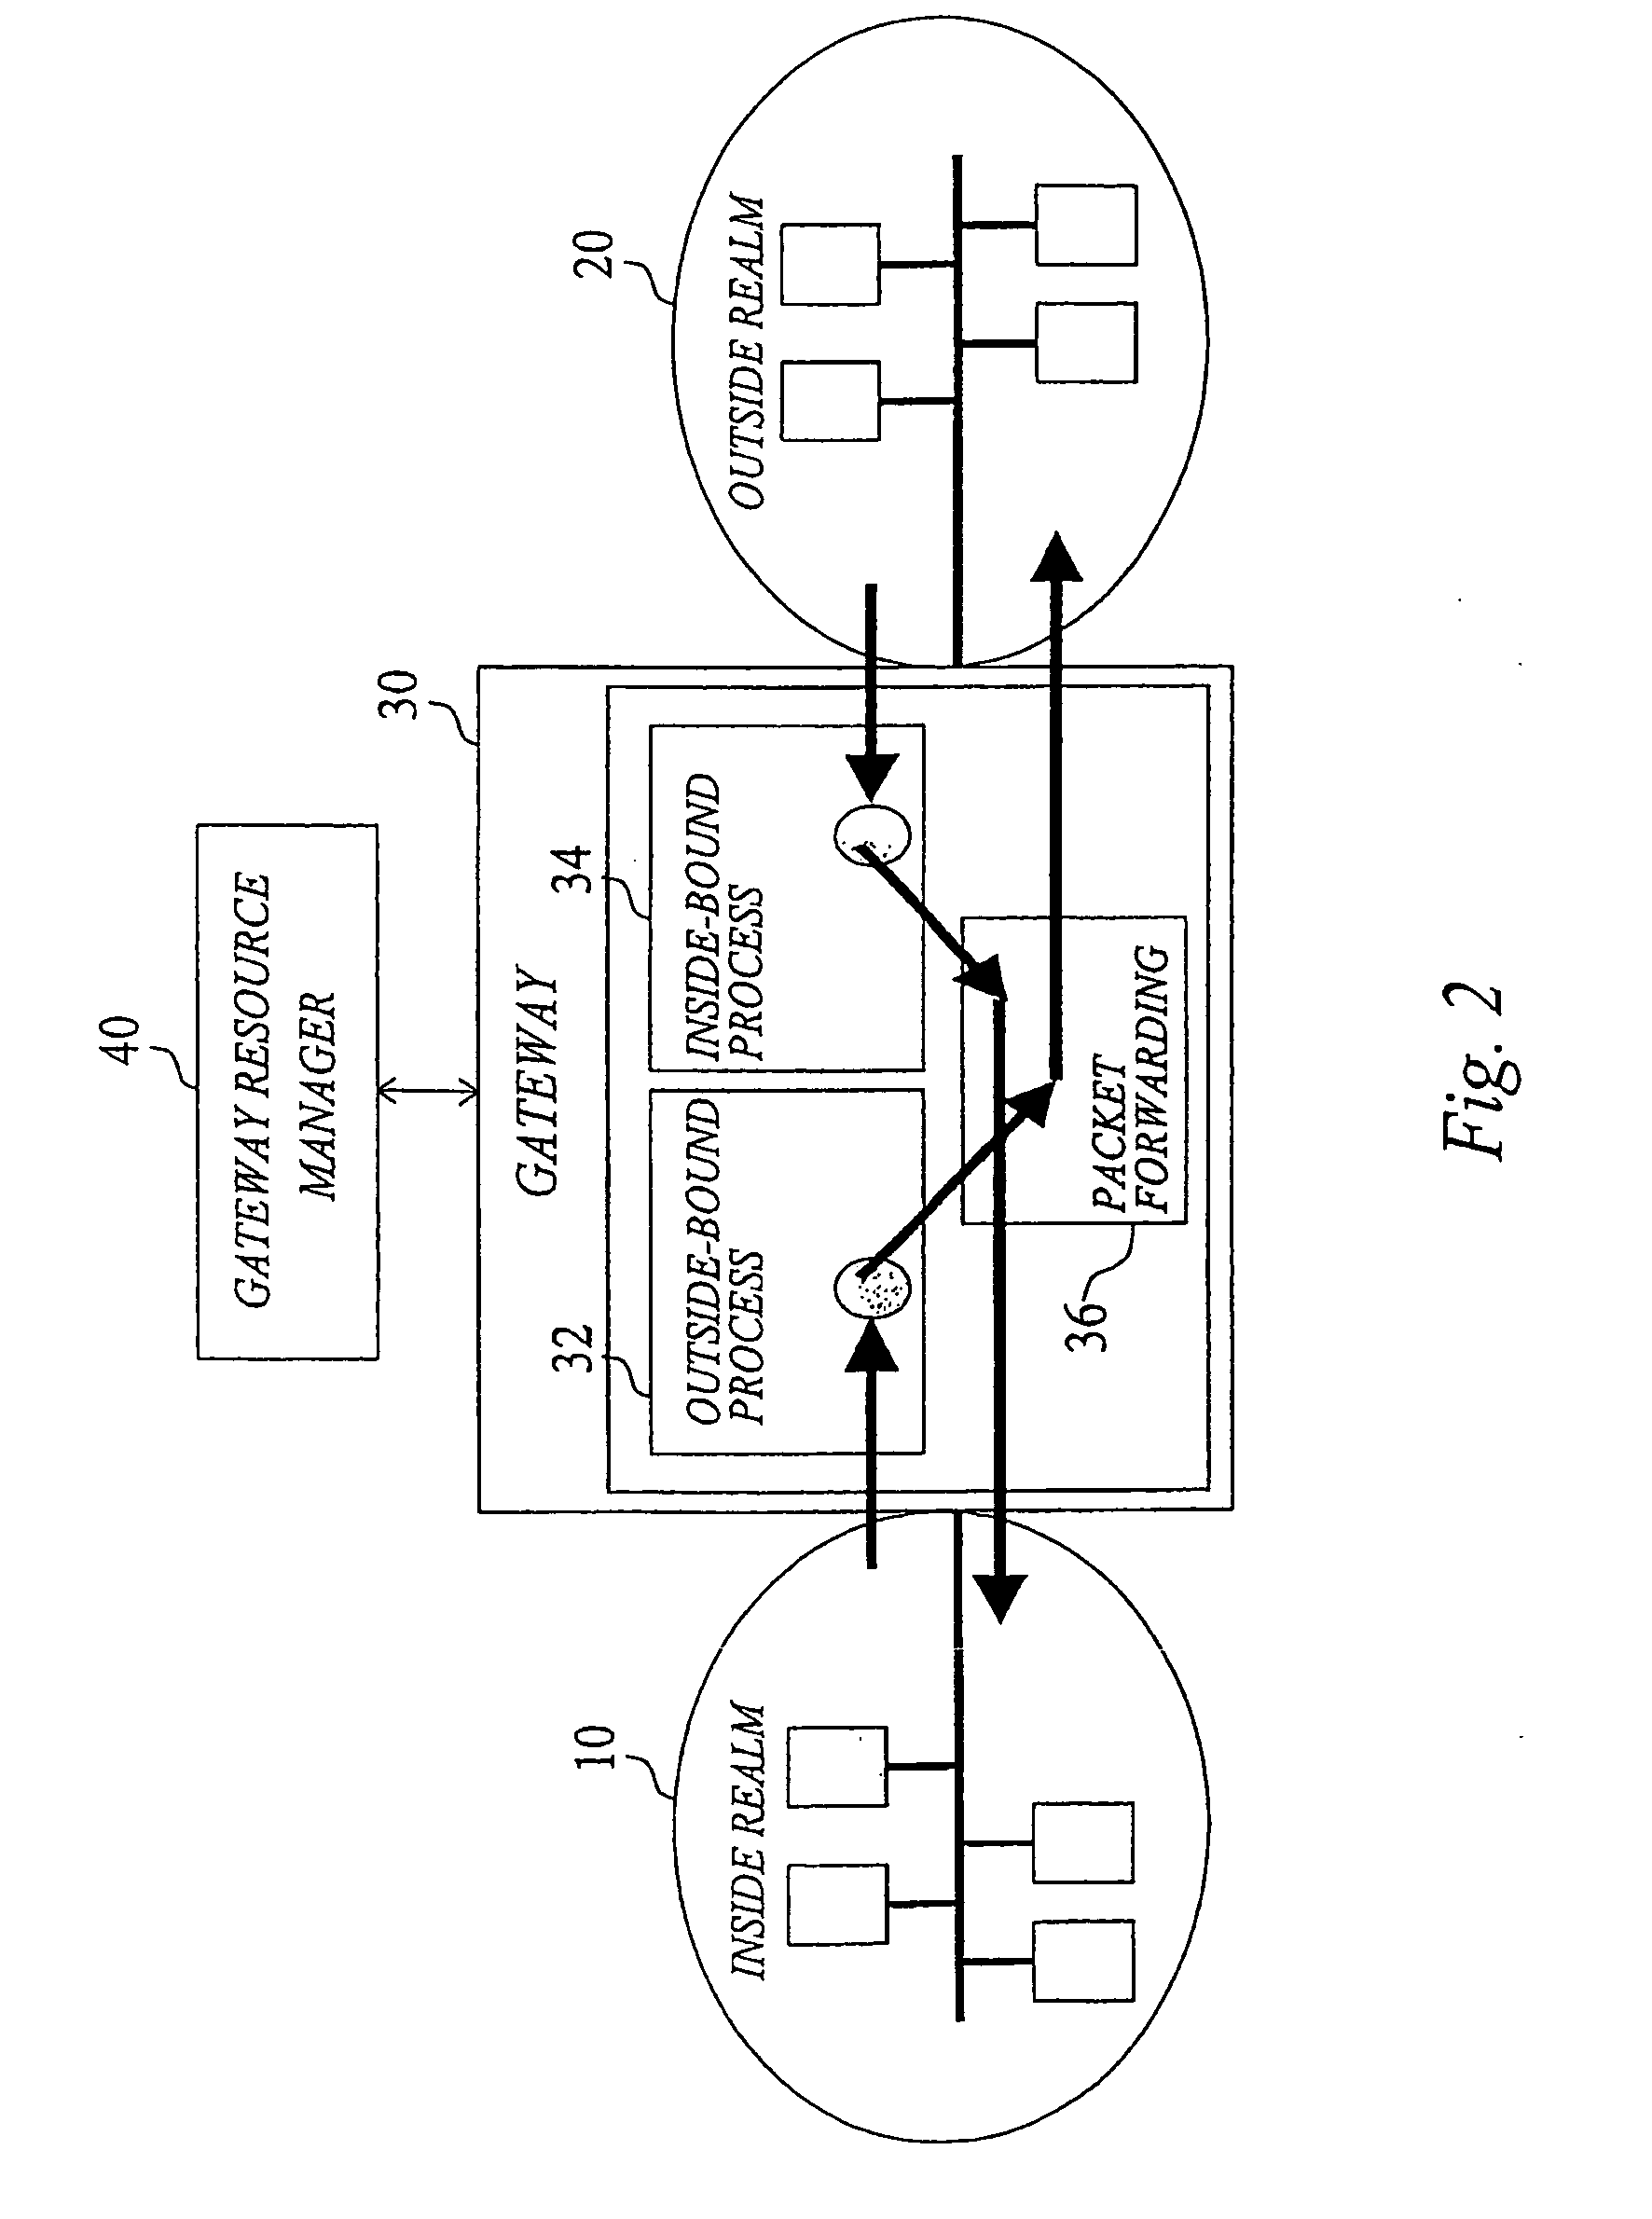 Method and system for enabling connections into networks with local address realms